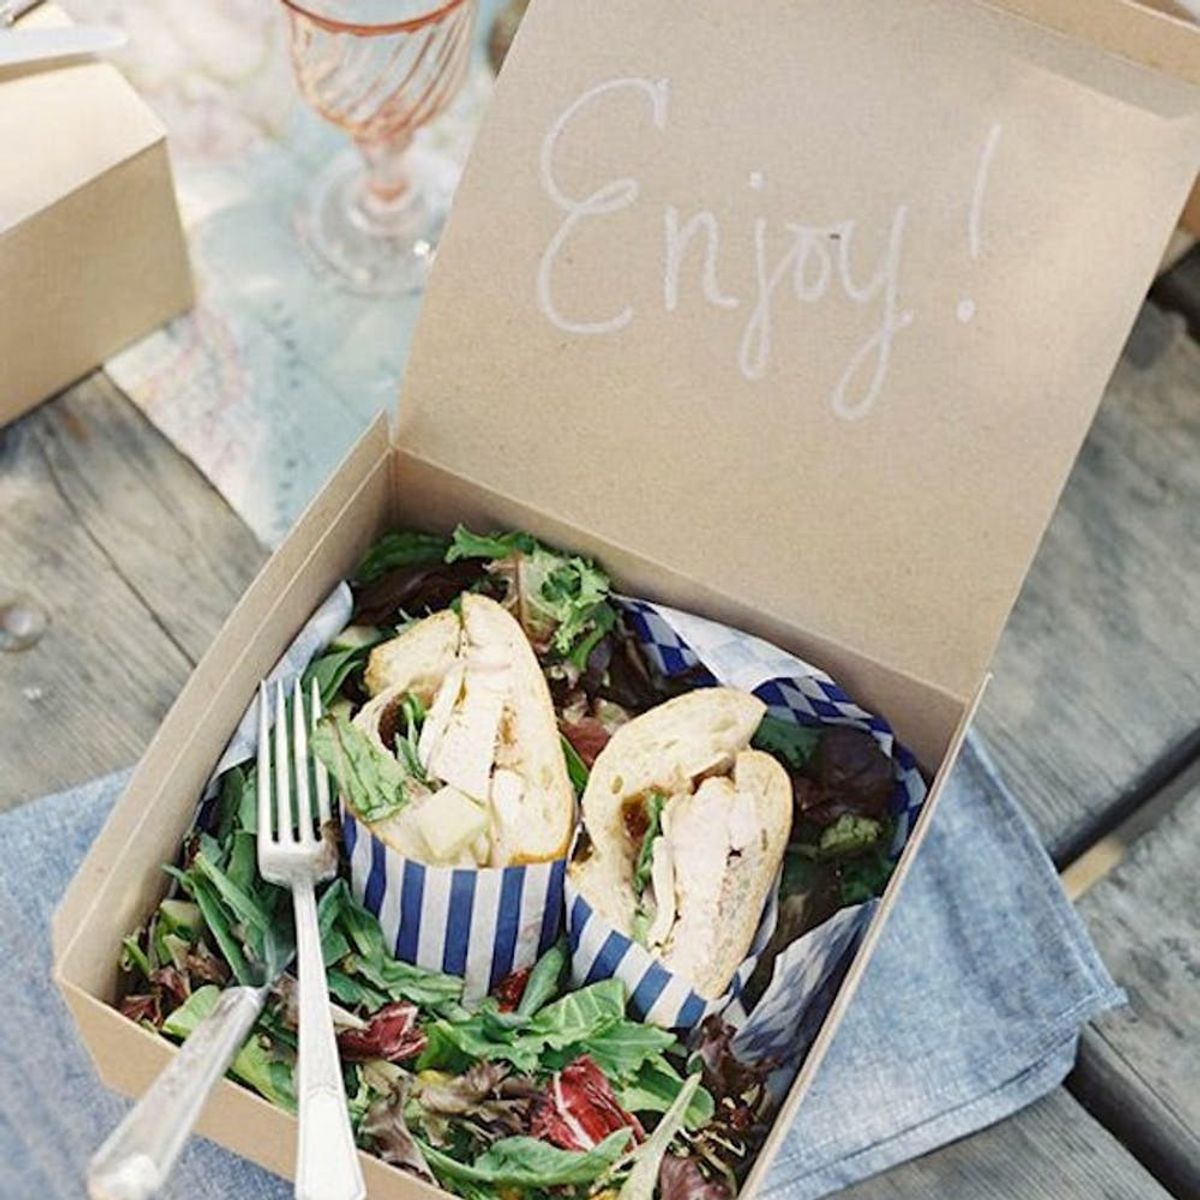 14 Picnic-Inspired Lunches to Pack Up Today